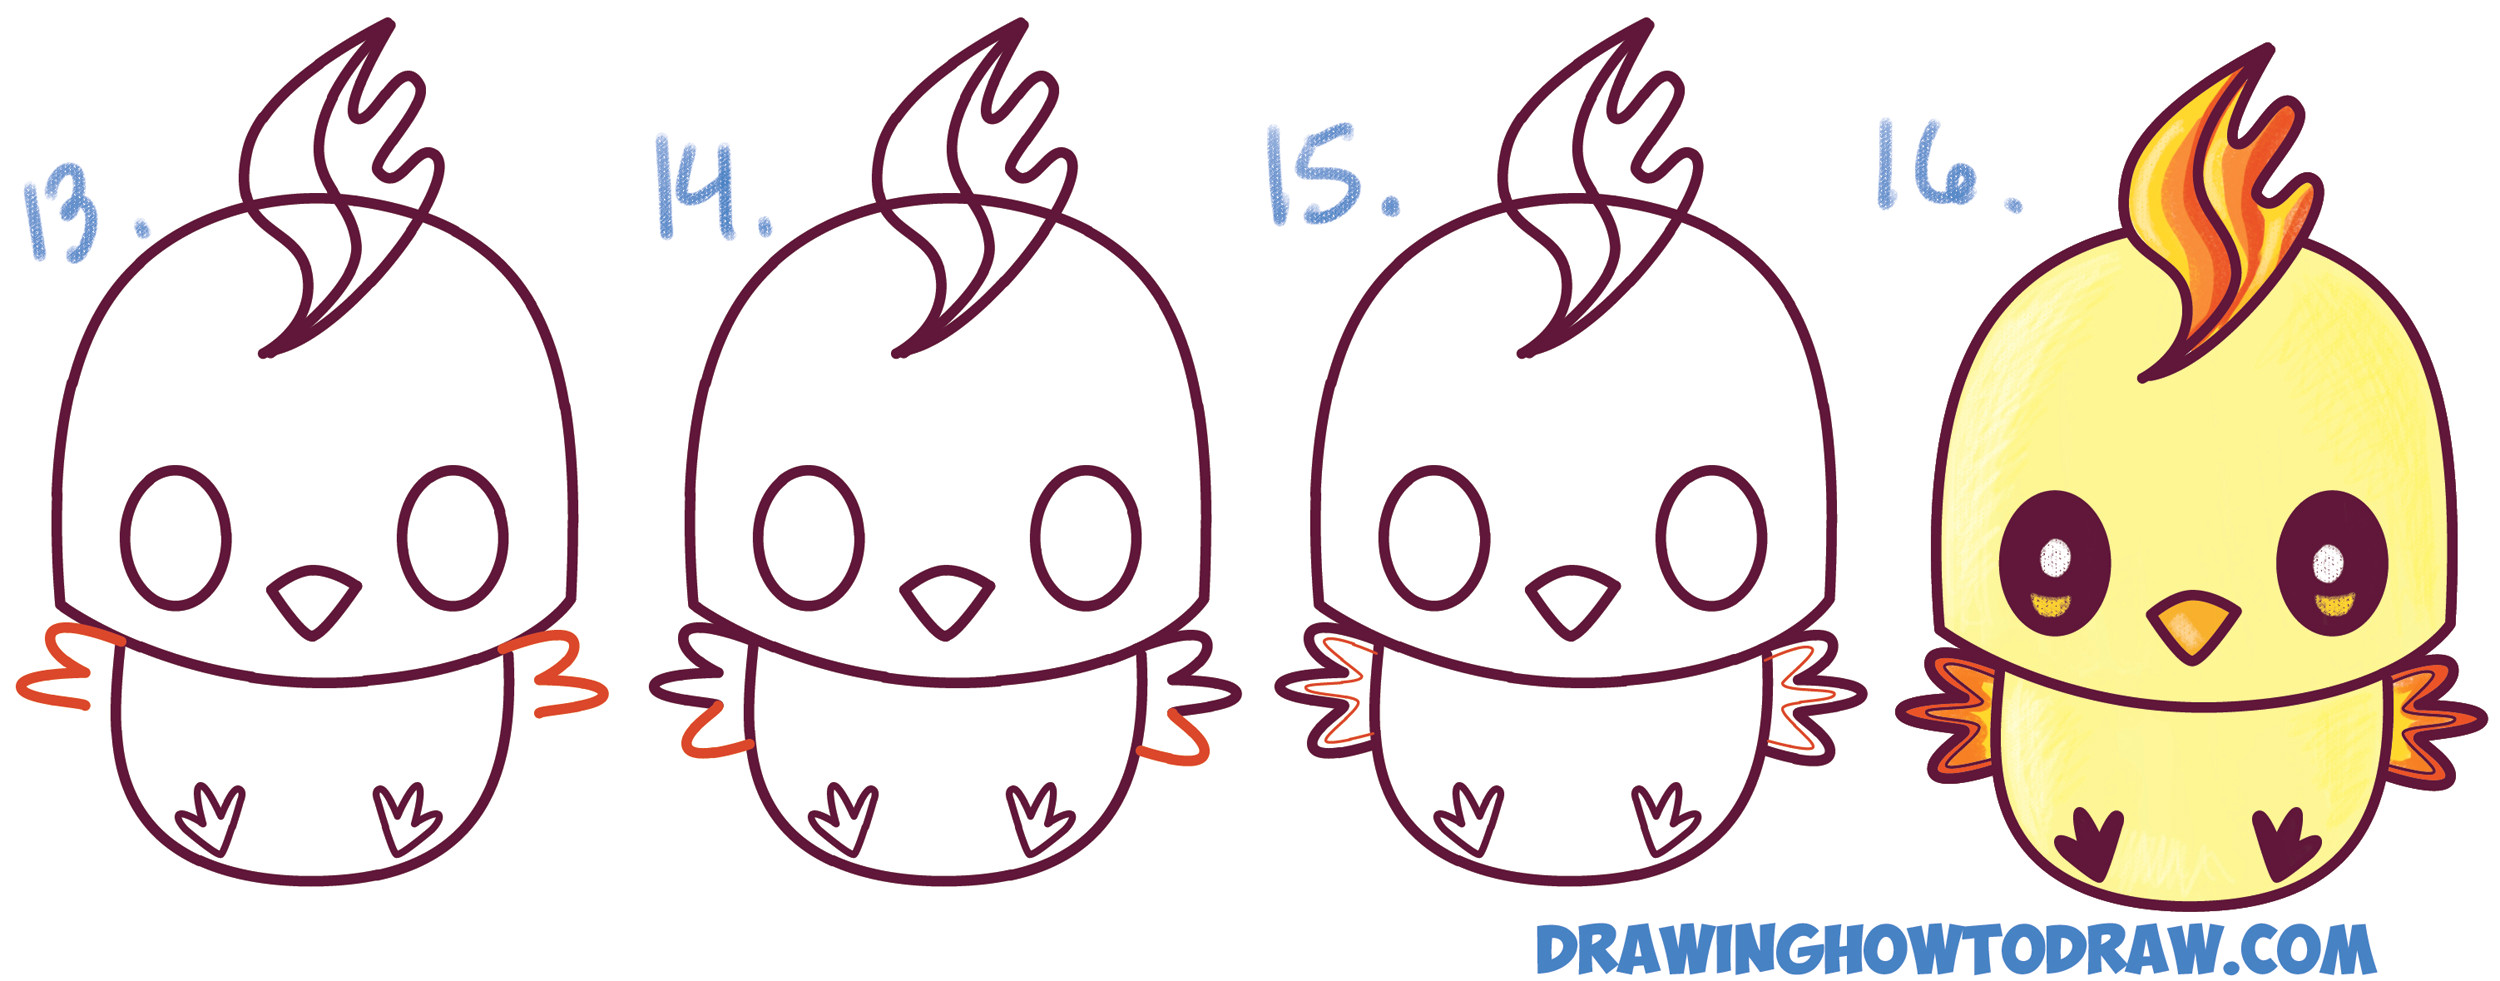 learn how to draw cute kawaii chibi moltres from pokemon in simple steps drawing